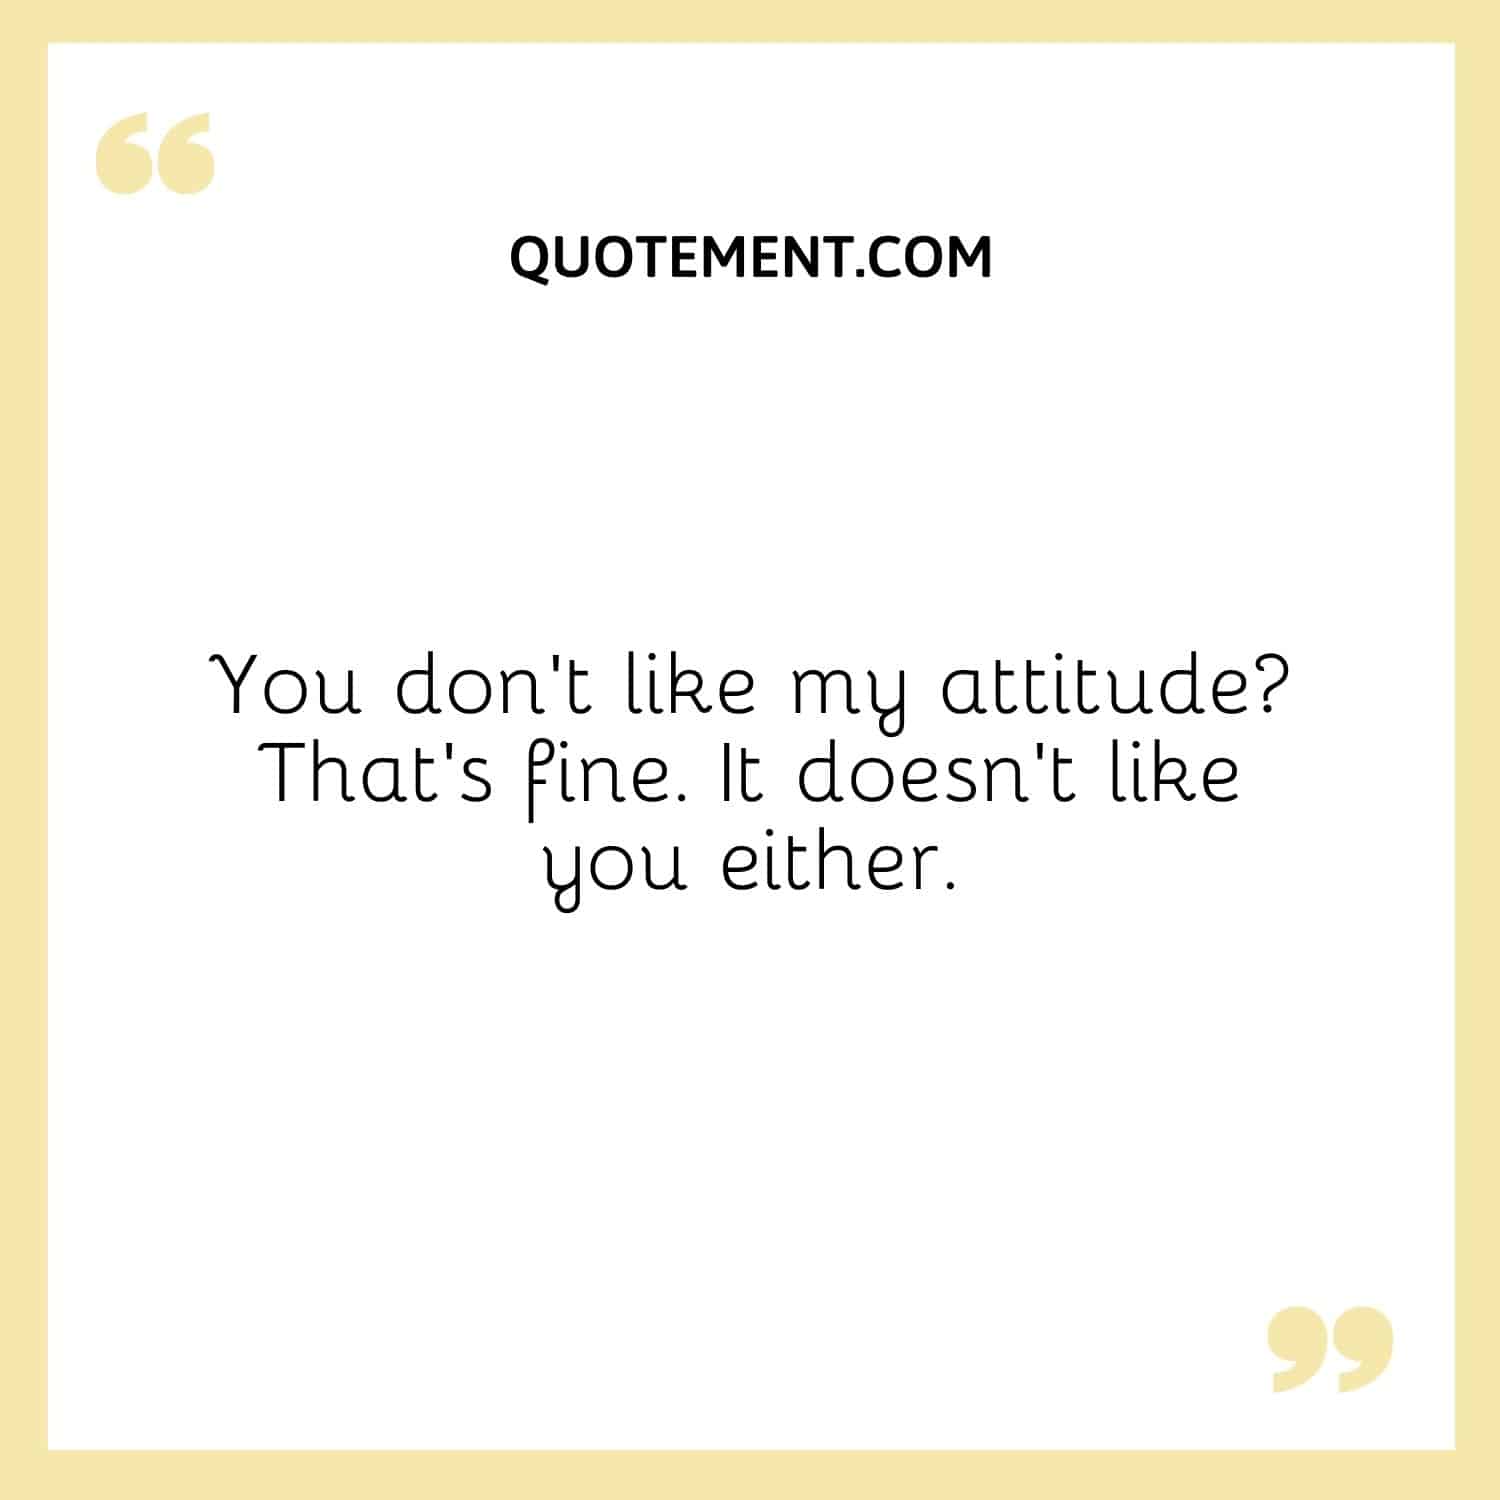 You don’t like my attitude That’s fine. It doesn’t like you either.